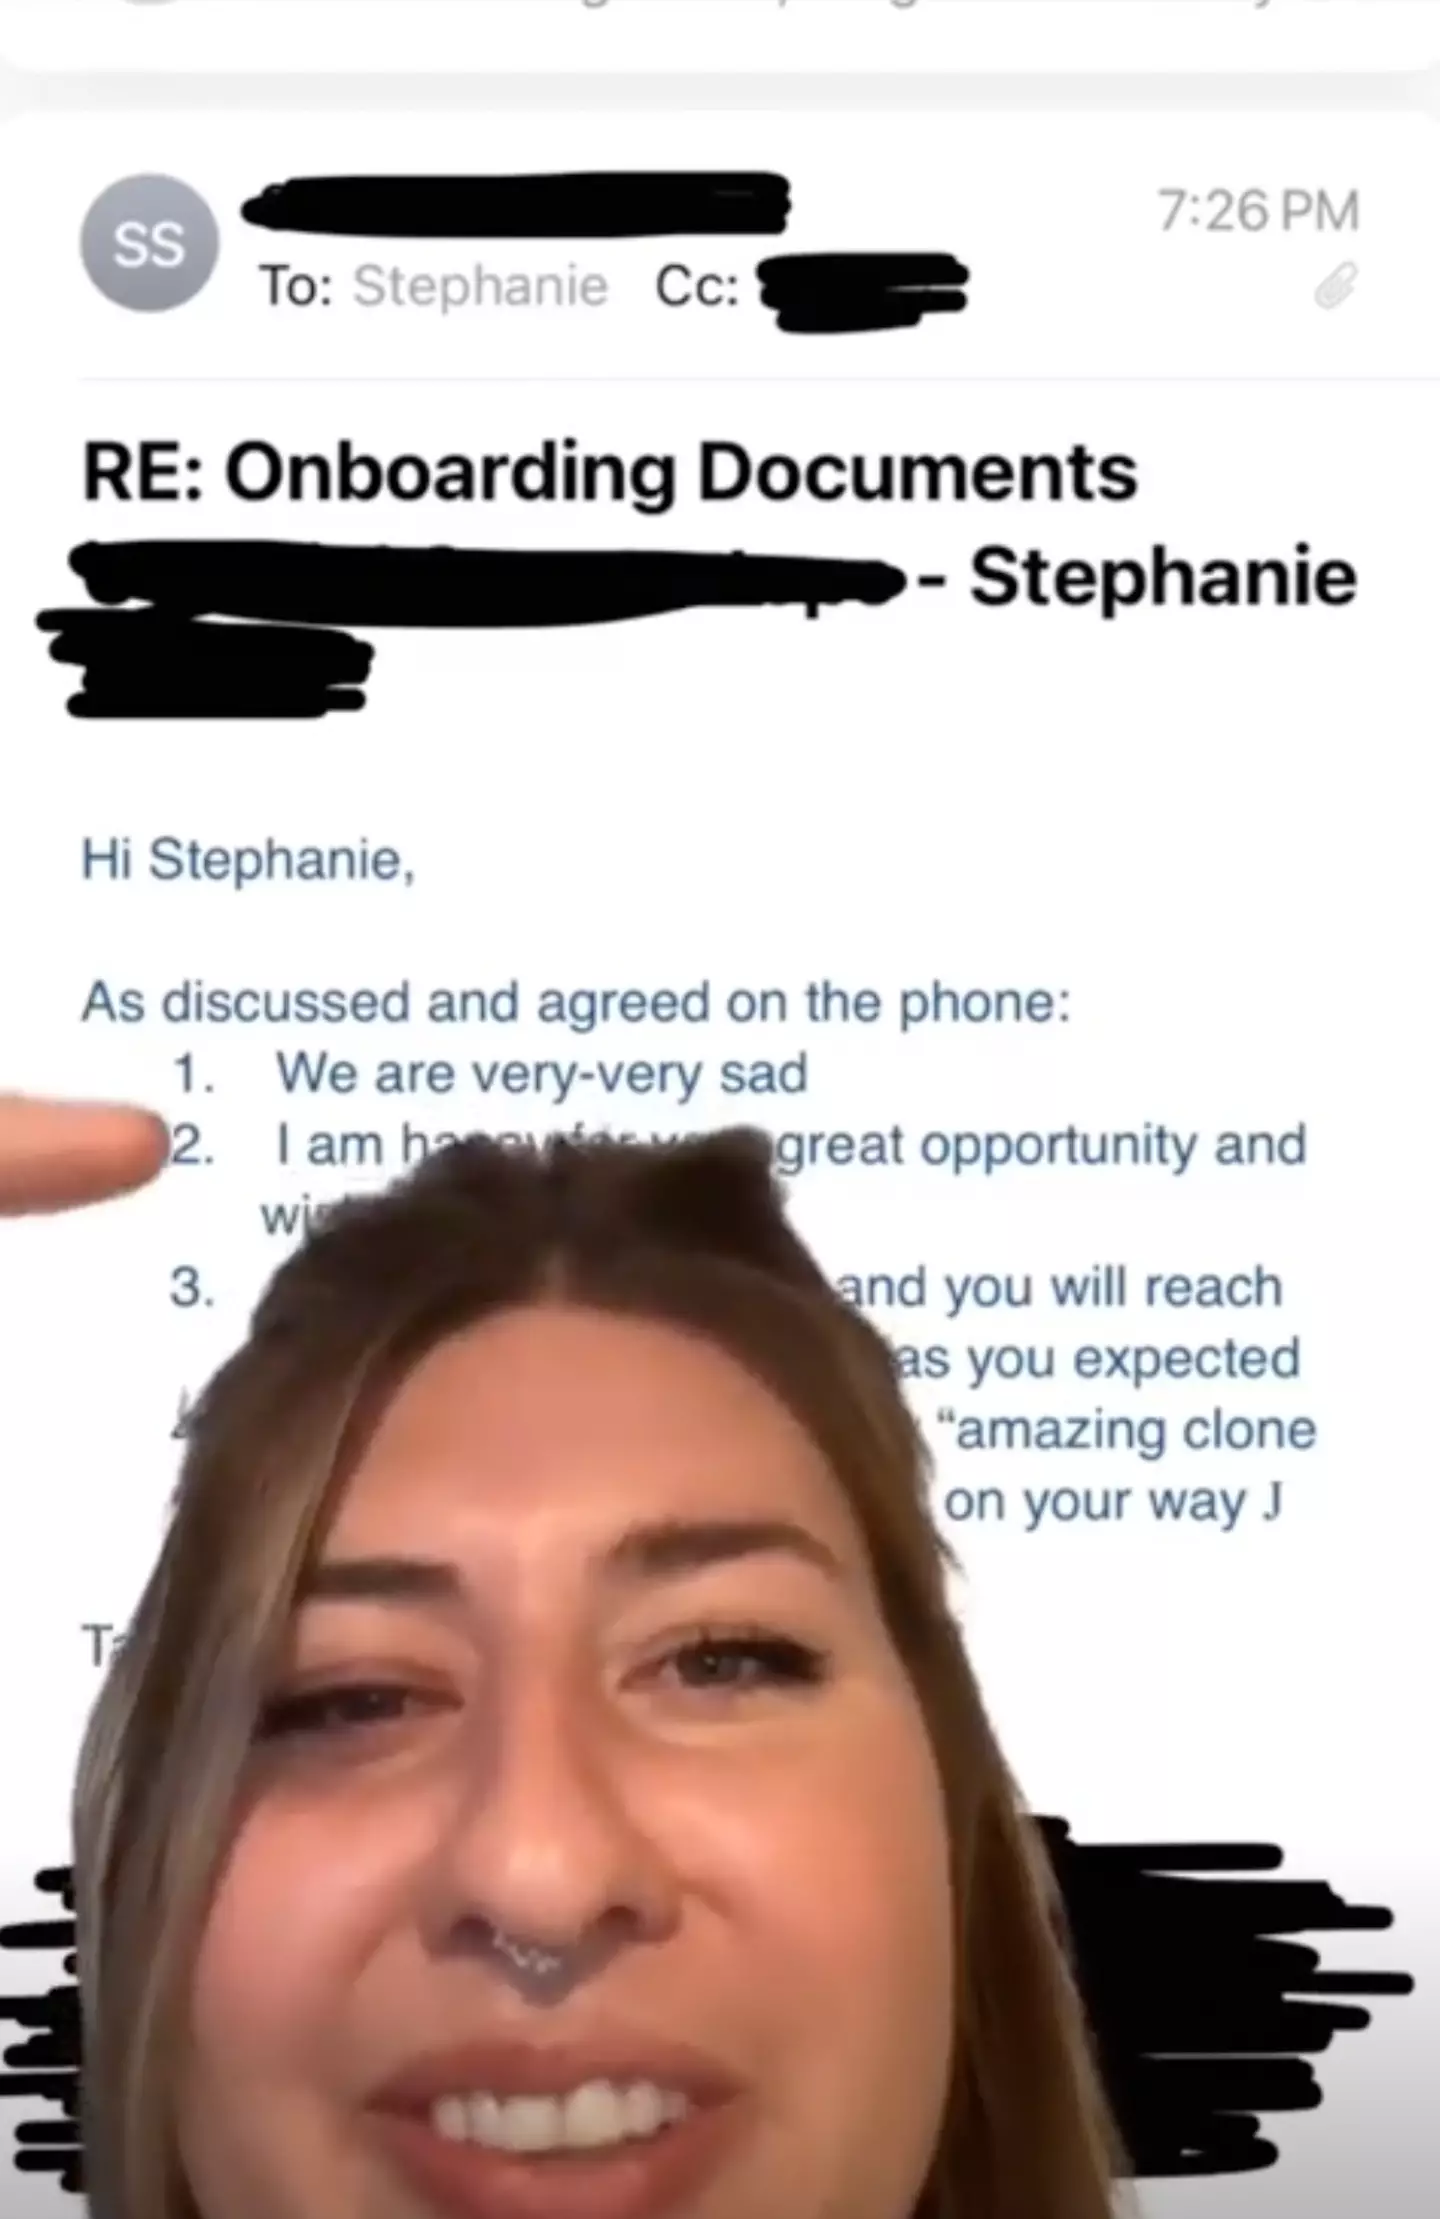 Stephanie was pleasantly surprised to get such a positive email from a HR department.